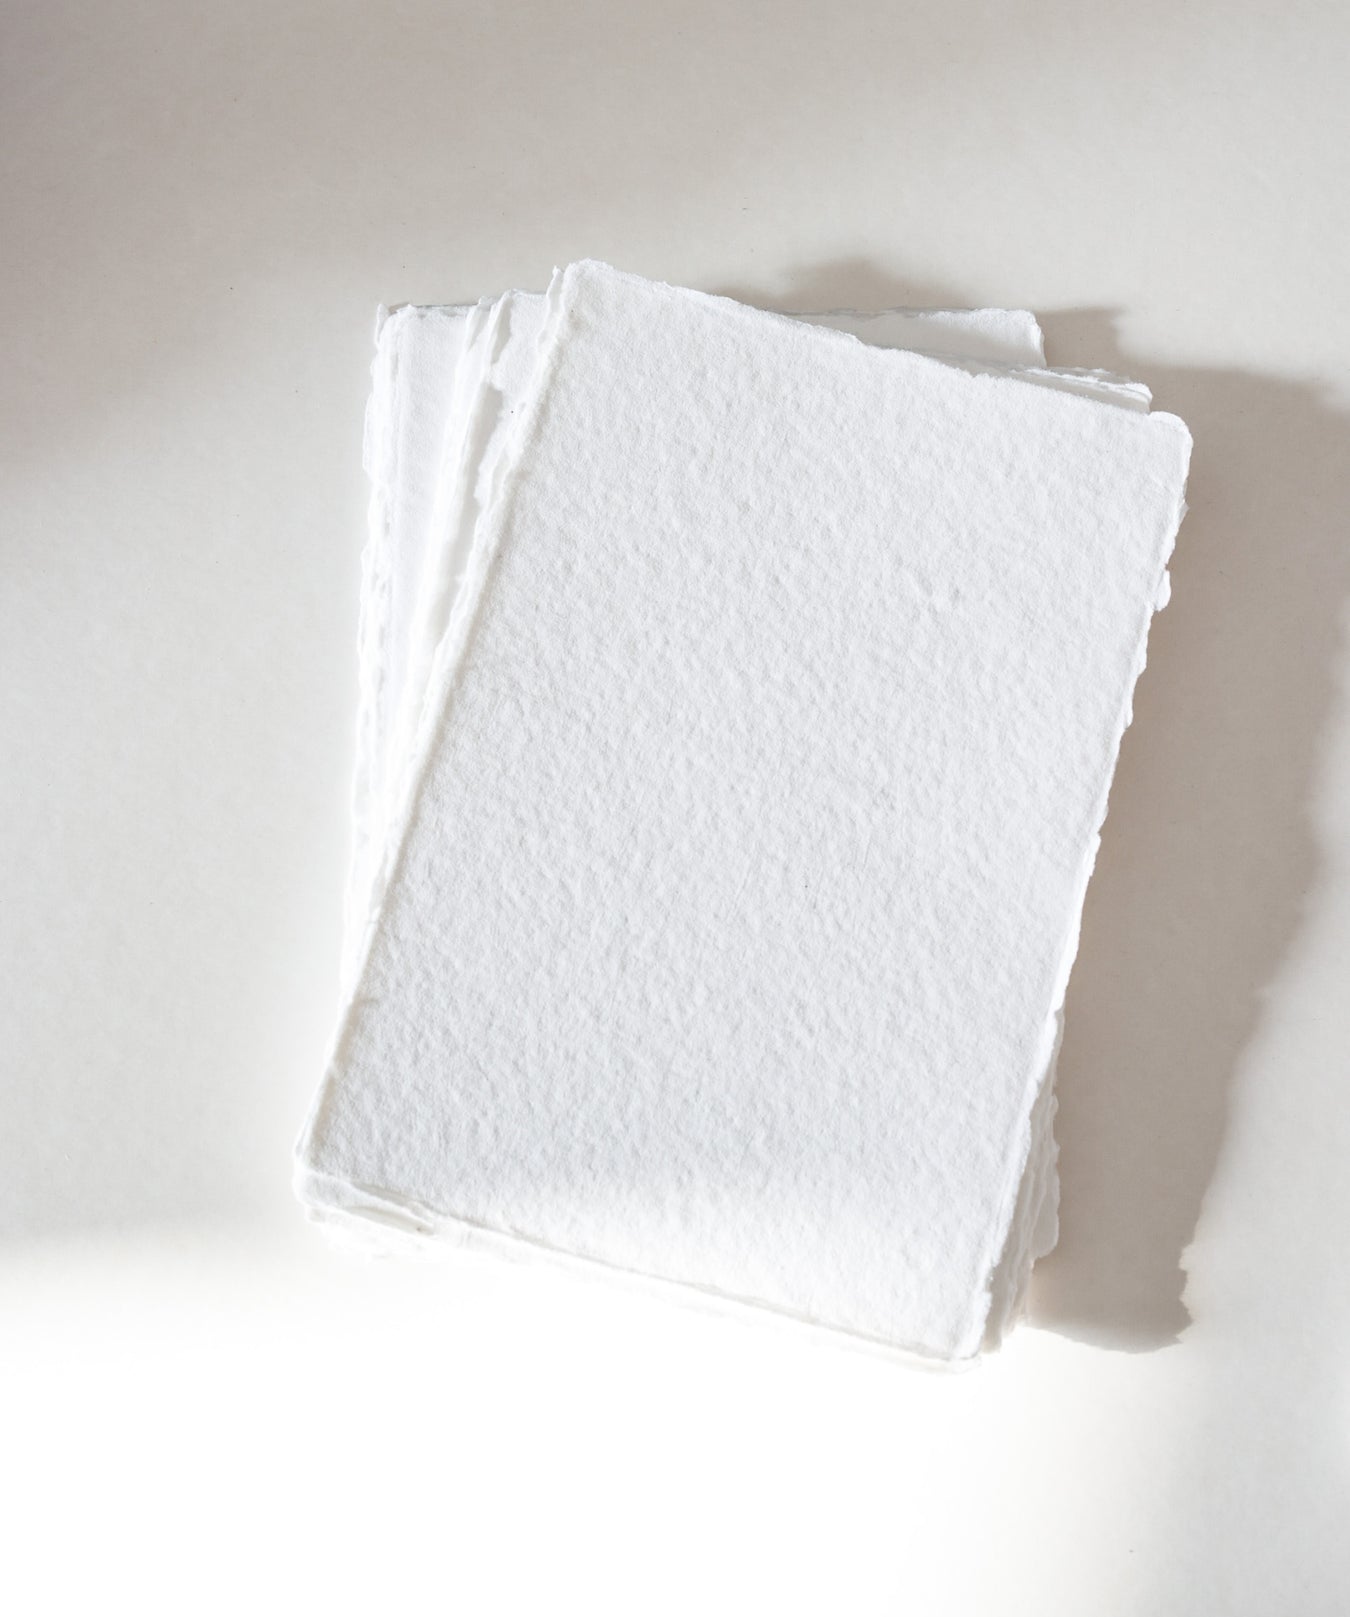 HANDMADE COTTON RAG and RECYCLED DECKLE EDGE PAPER